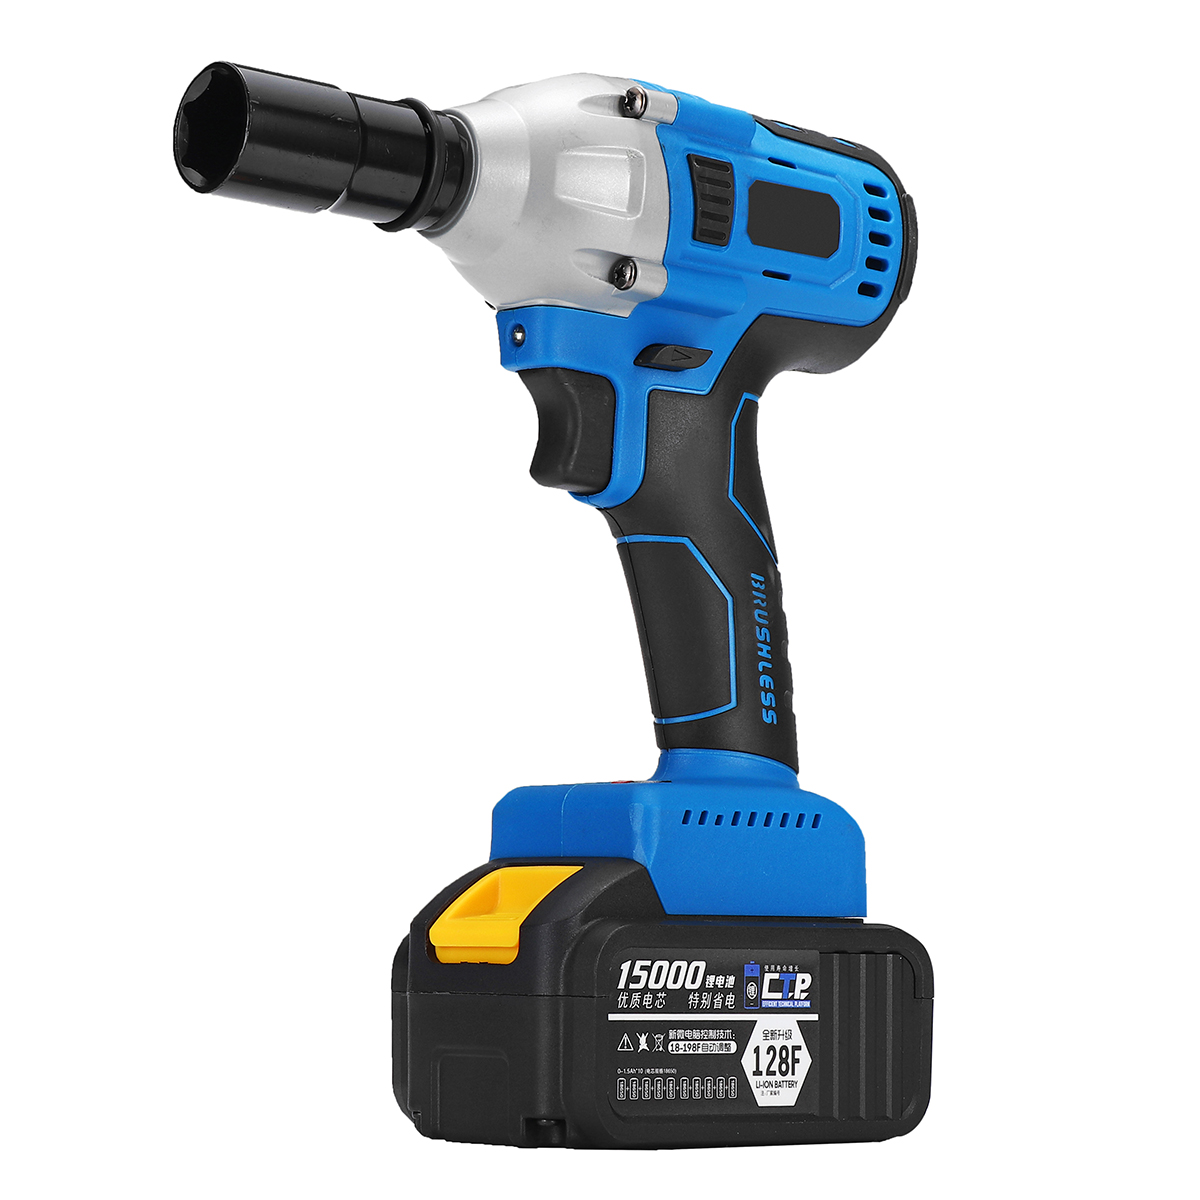 15000-30000mAH-Cordless-Impact-Wrench-Brushless-Electric-Wrench-12-Socket-Tool-1369004-6